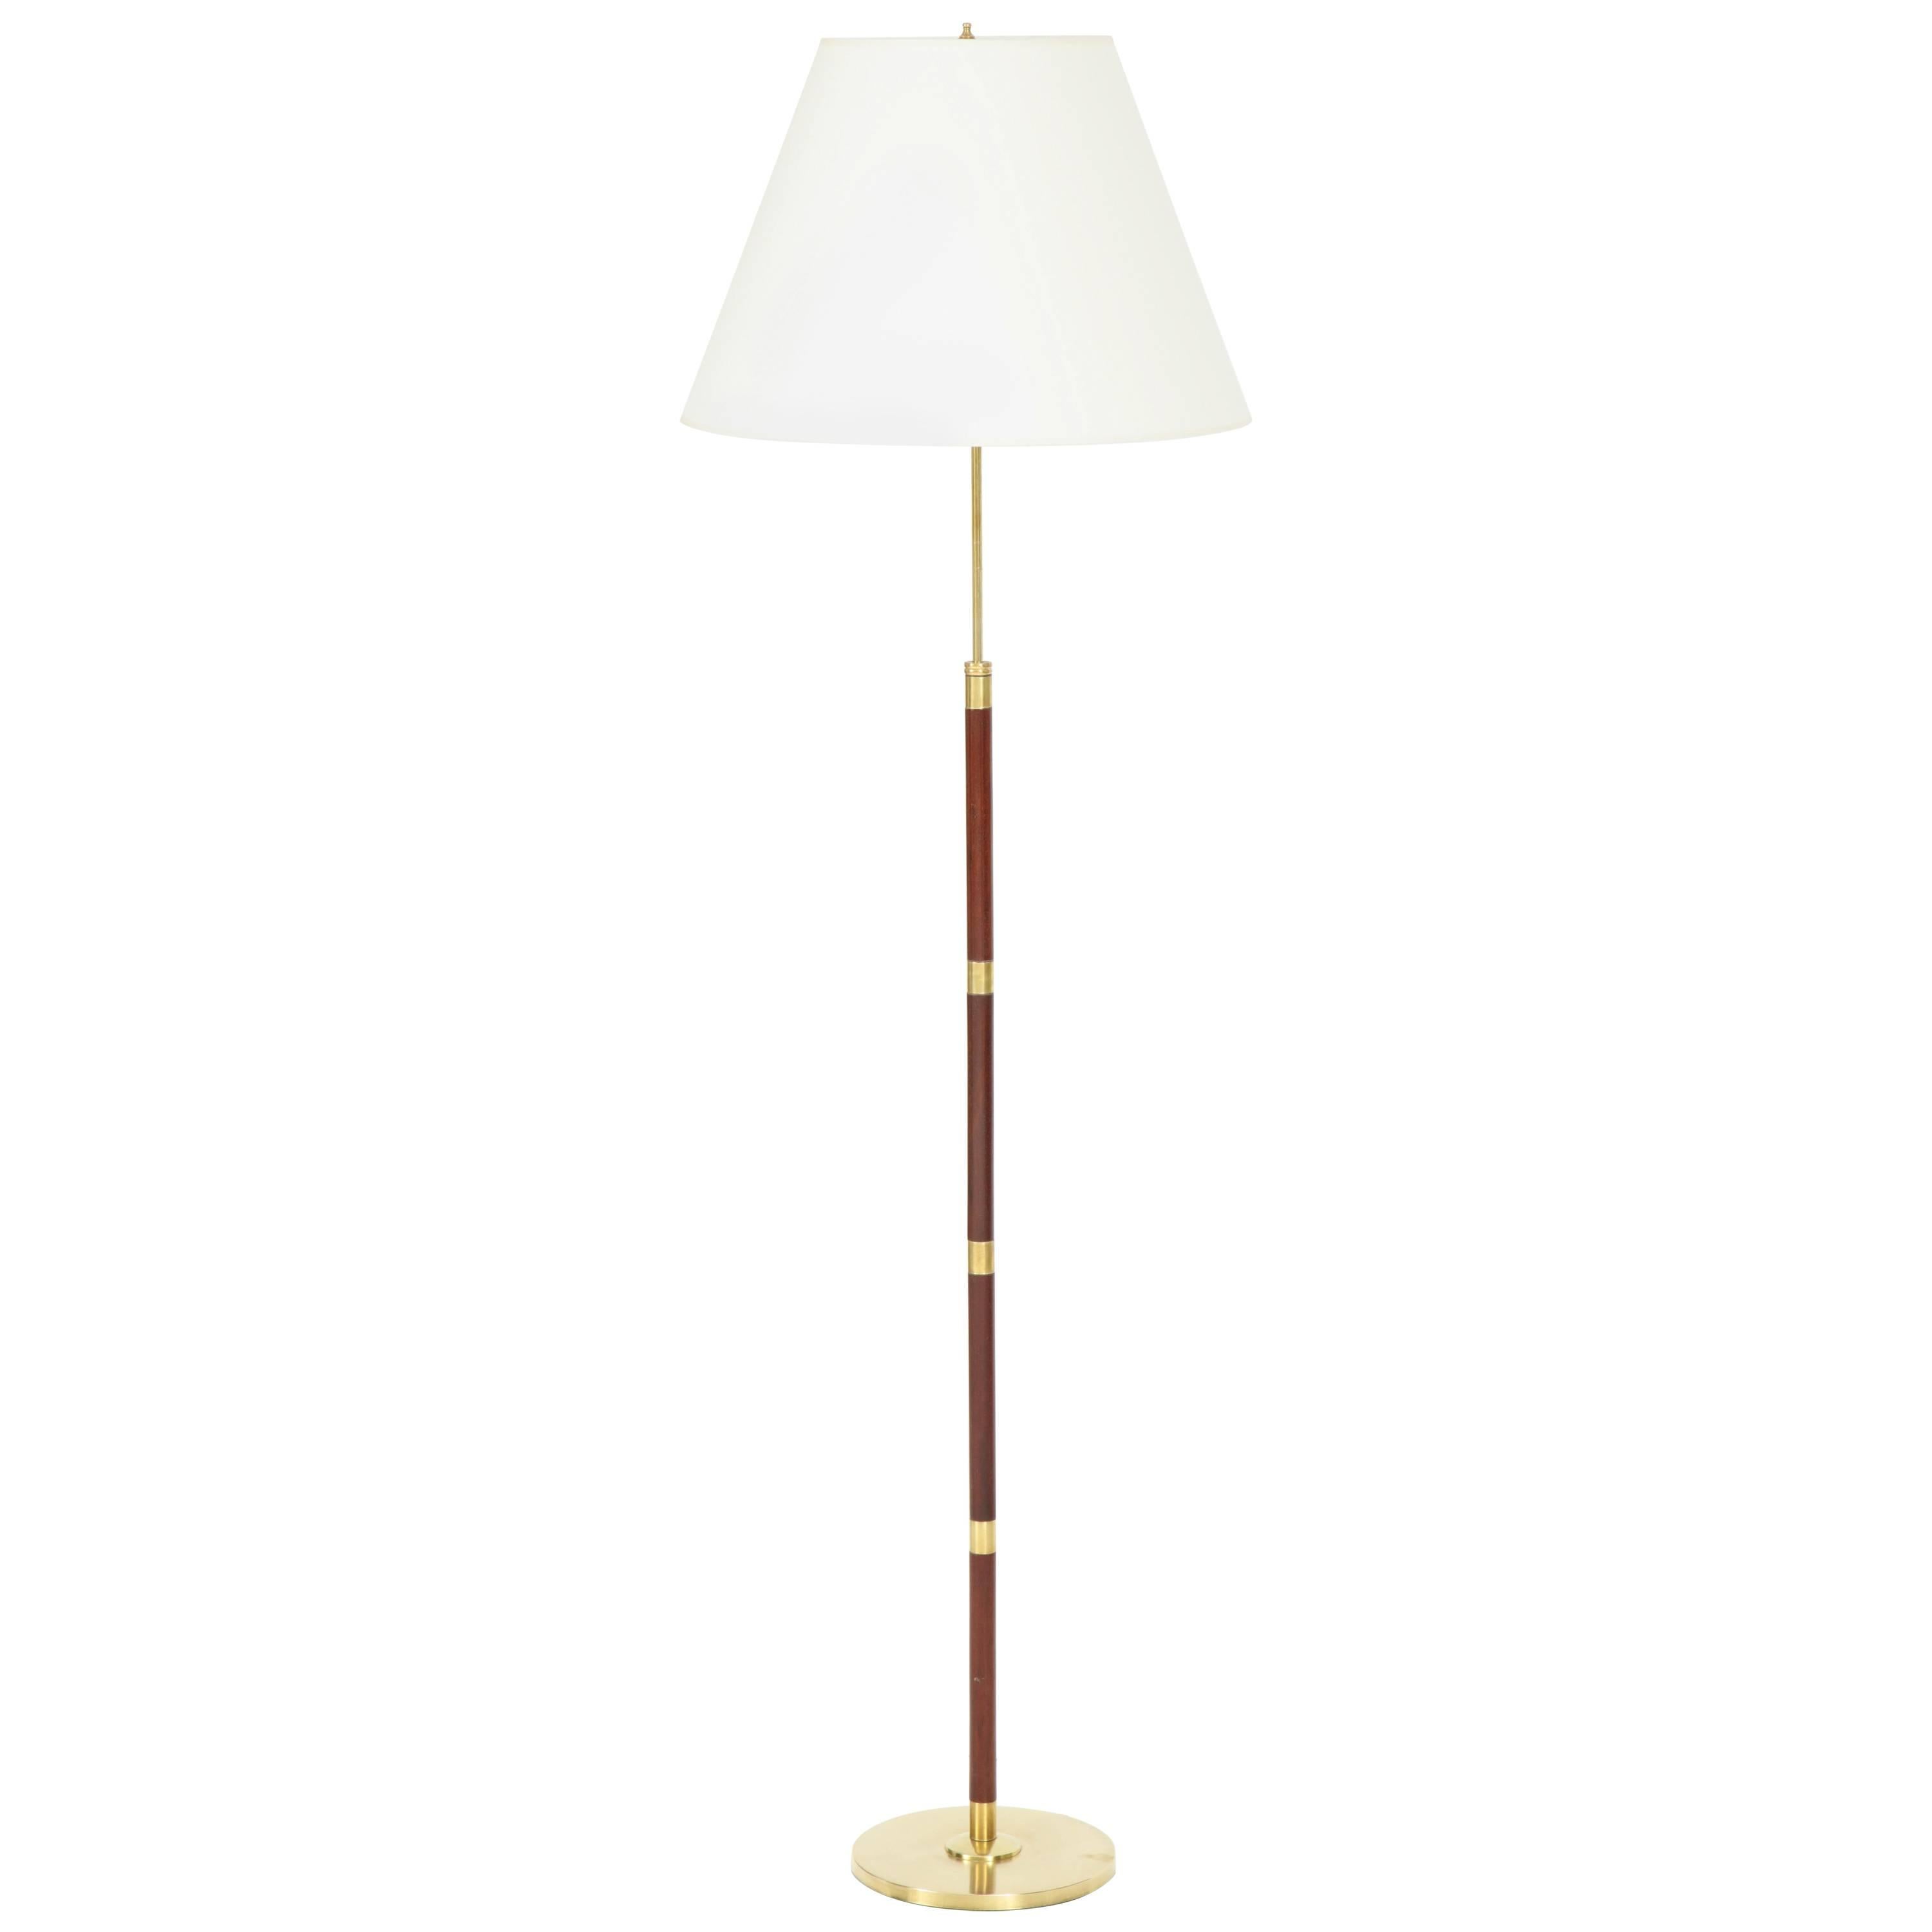 Danish Rosewood and Brass Floor Lamp by Fog & Mørup, circa 1960s